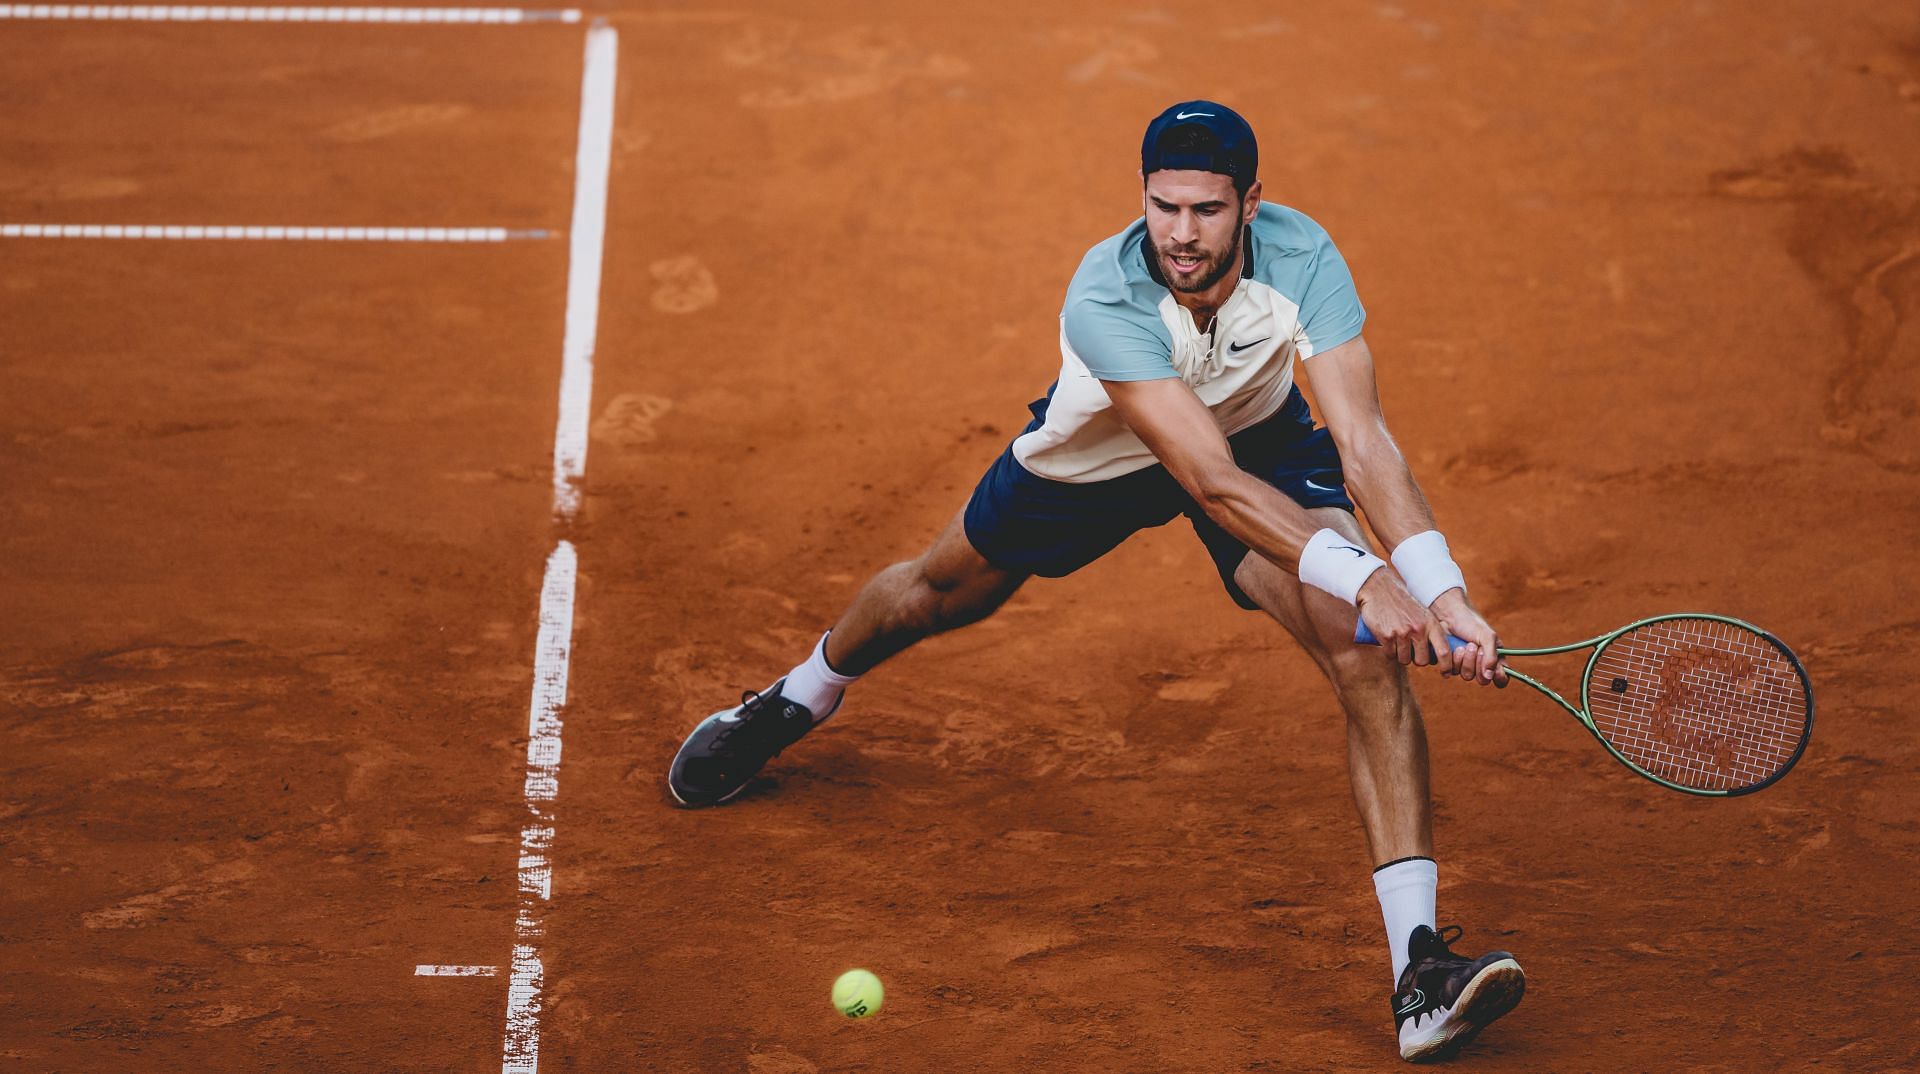 Khachanov will be the favorite in this encounter